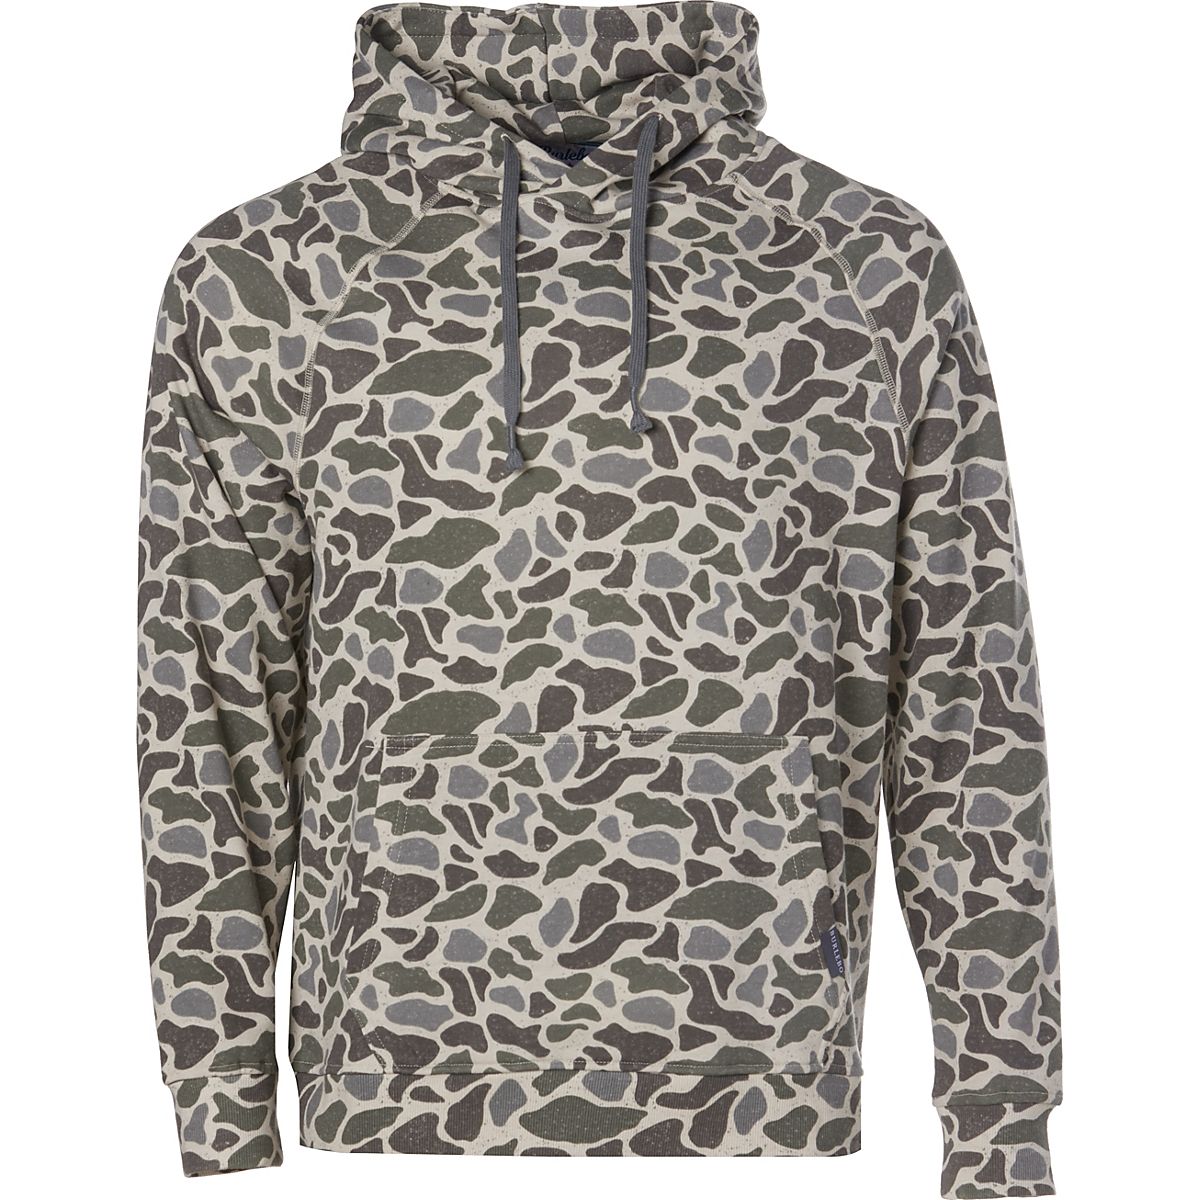 BURLEBO Men’s Fleece Pullover Hoodie | Free Shipping at Academy